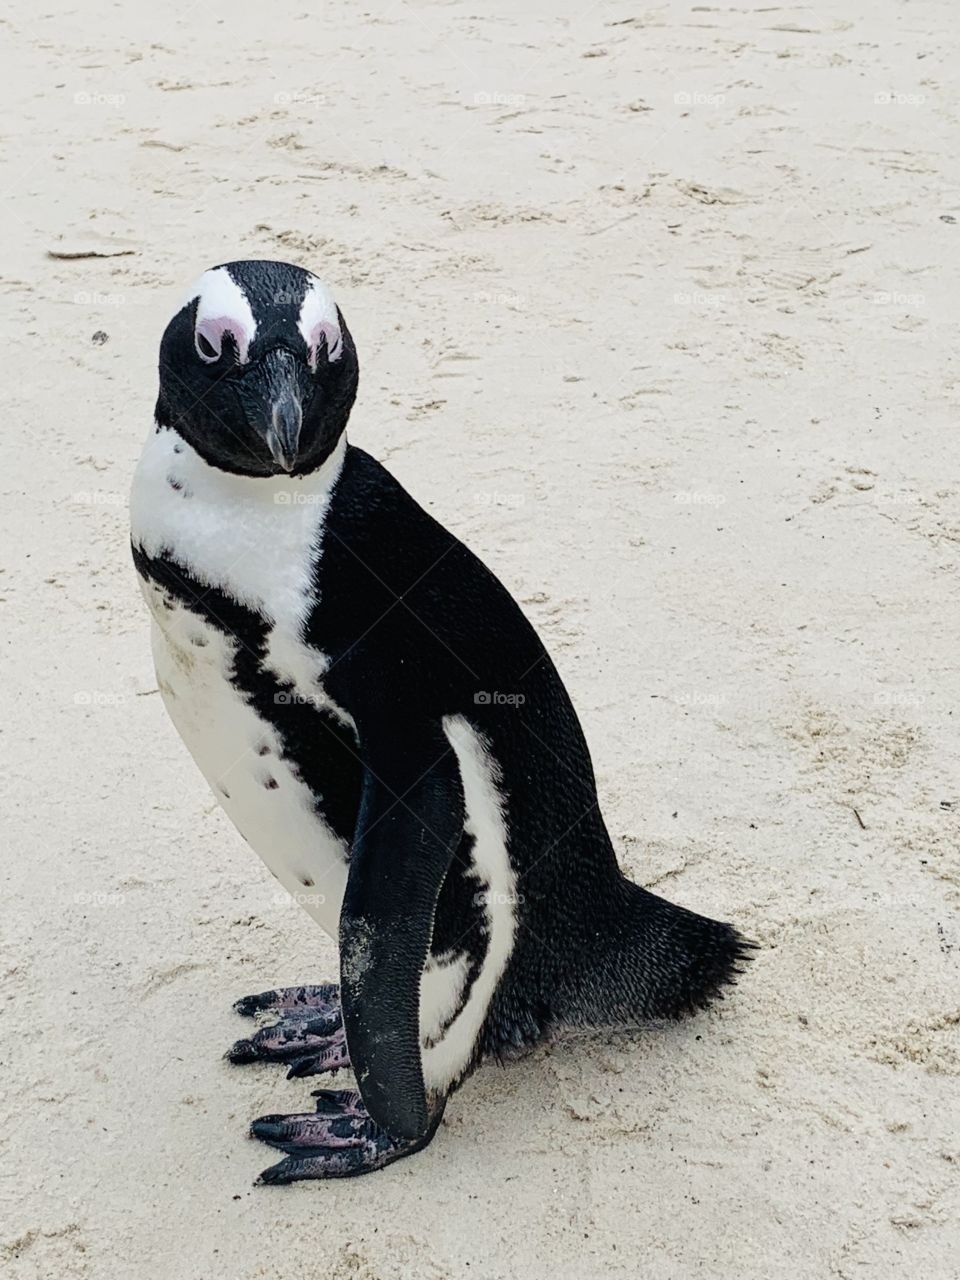 Penguin at Boulders Beach, Cape Town, South Africa 